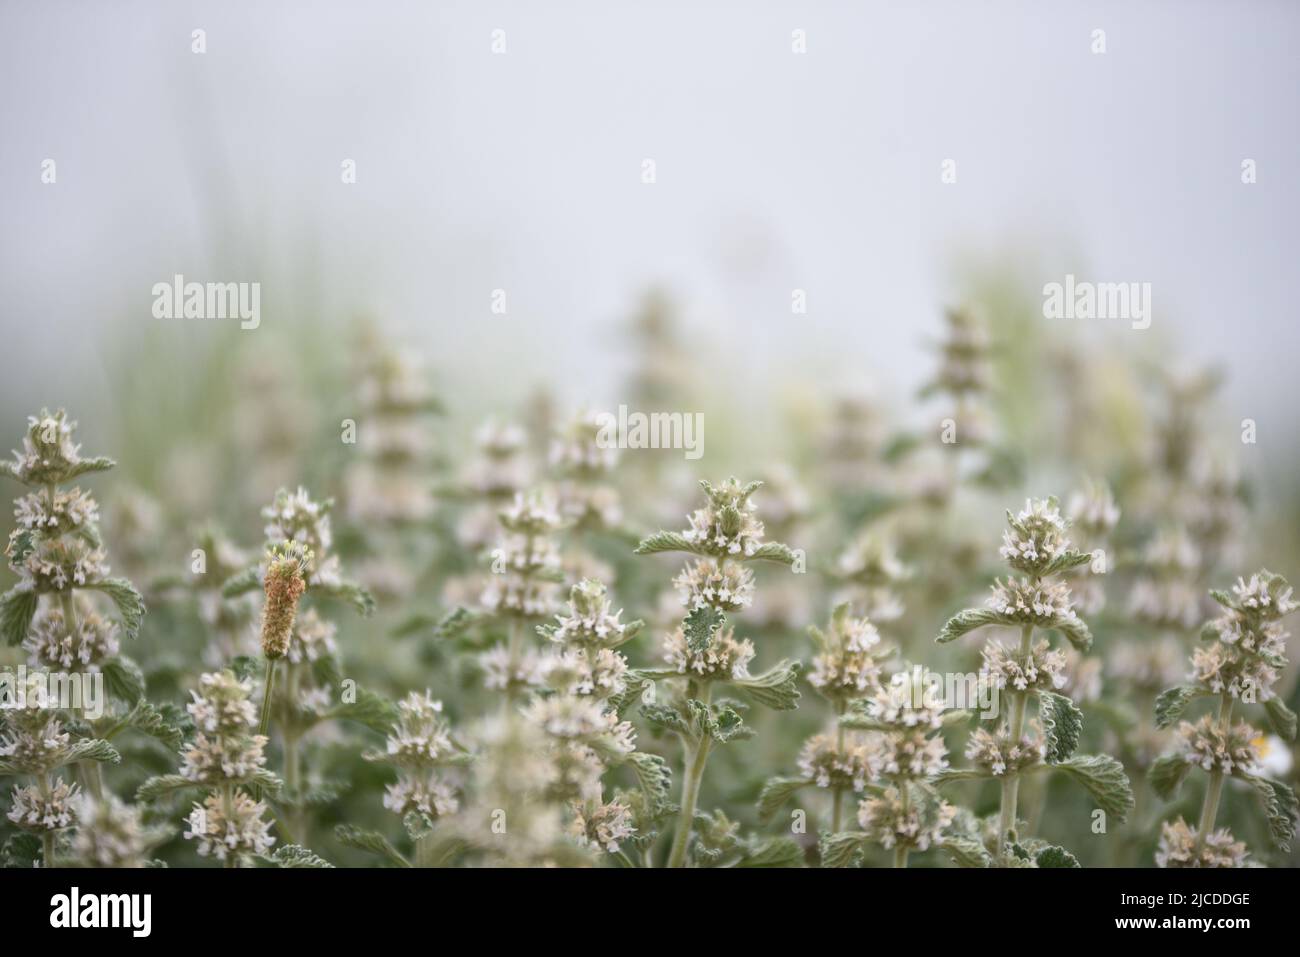 A Common Horehound (Marrubium Vulgare) is seen at a field during spring. According to AEMET, the Spanish meteorological agency, it was the fourth driest spring since 1961, and the second driest of the 21st century, only behind 2005. Precipitation in the country as a whole was 33% below normal and the average temperature was 12.5ºC. This temperature was 0.4ºC higher than the average of last decades. (Photo by Jorge Sanz/SOPA images/Sipa USA) Credit: Sipa USA/Alamy Live News Stock Photo